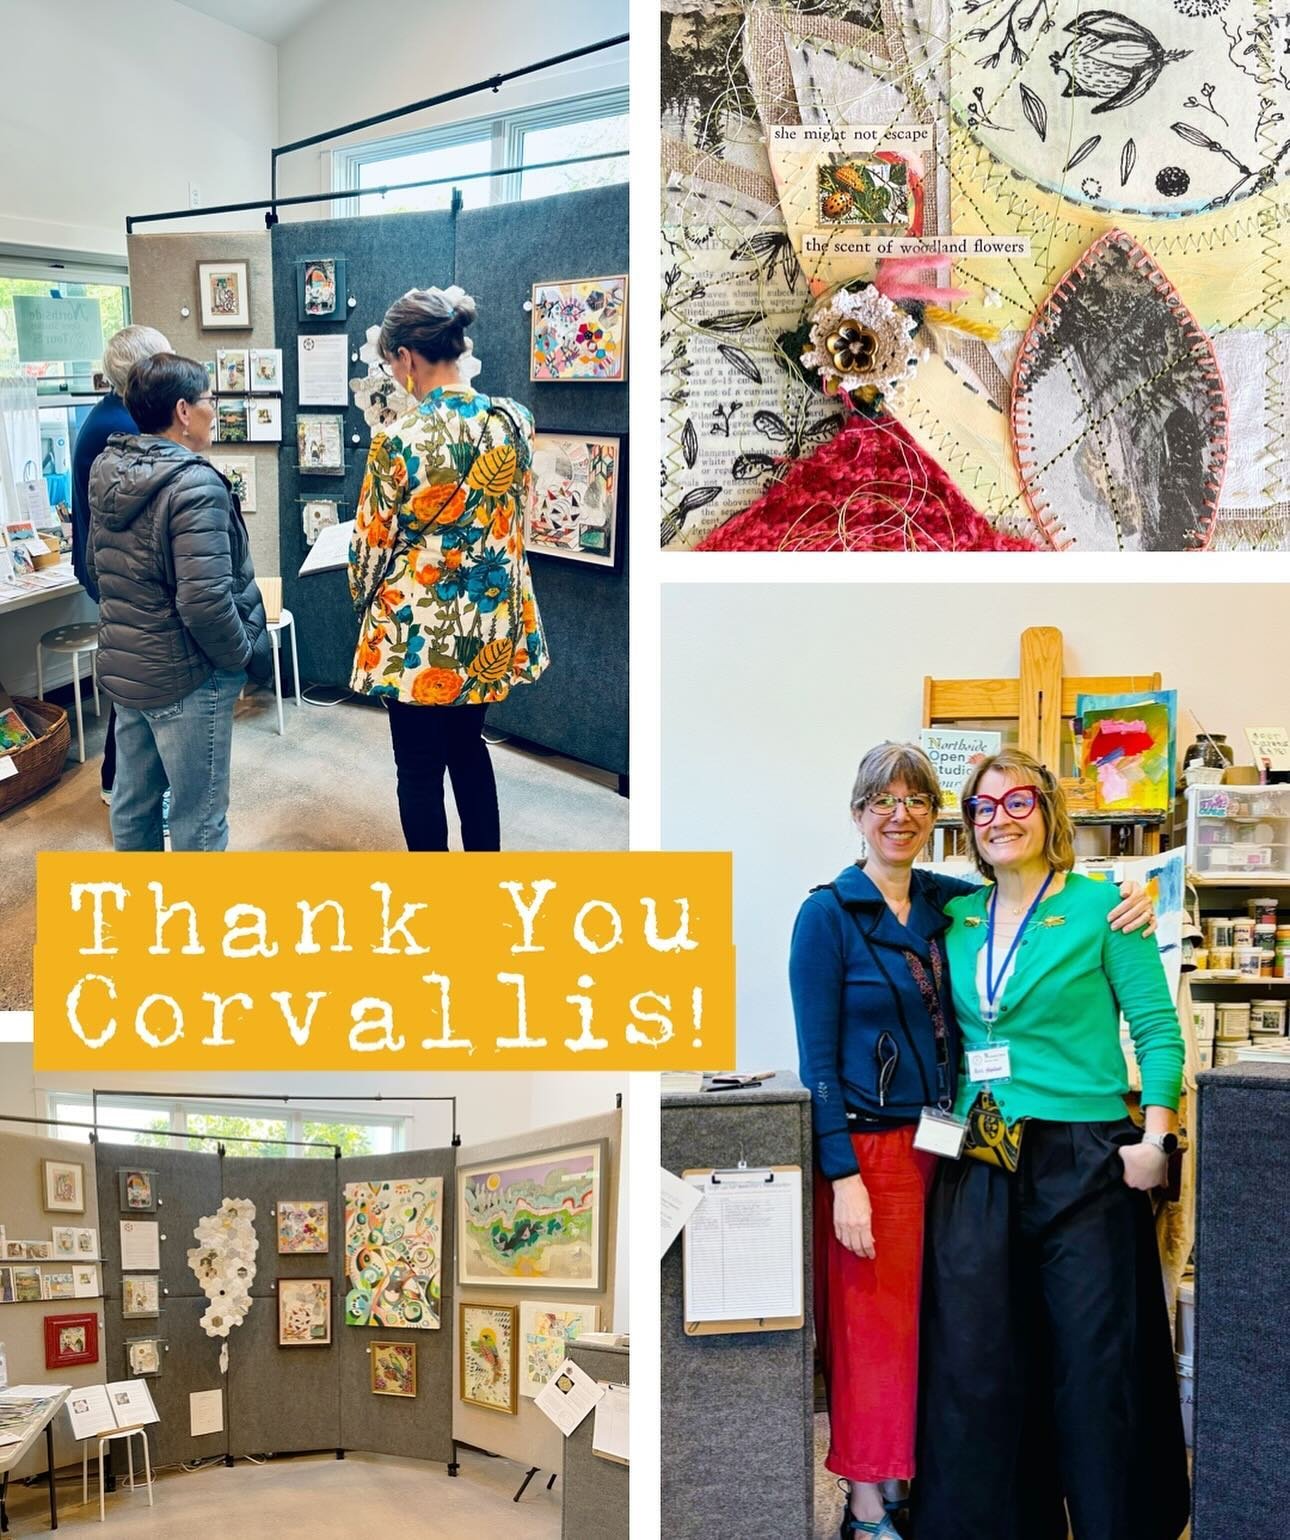 Thank you to everyone who came out to support @northsideopenstudiostour this weekend!

#community #openstudio #studiotour #corvallis #corvallisoregon